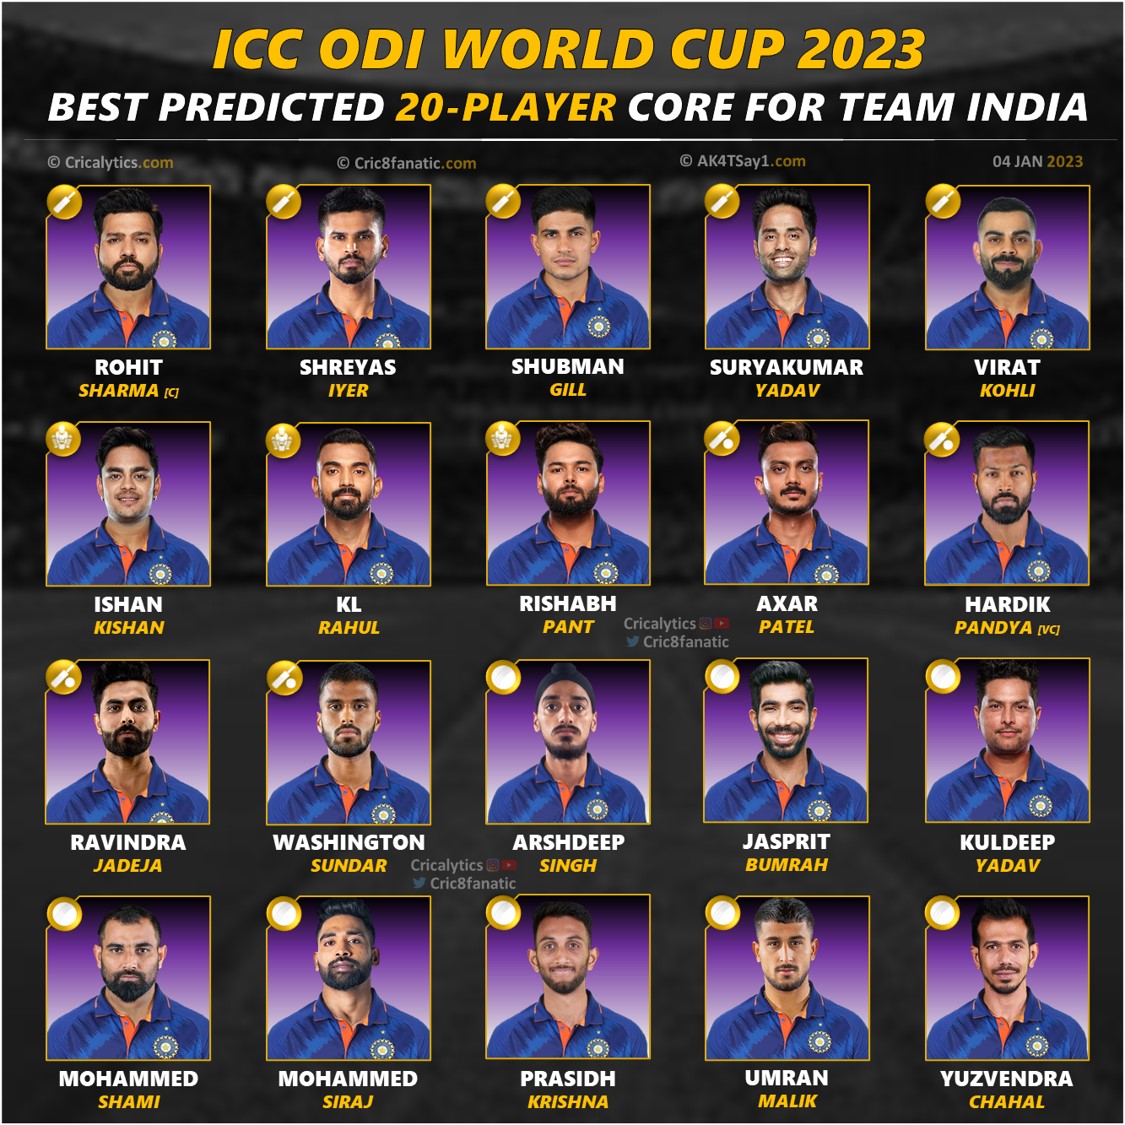 ODI world cup 2023 best predicted 20 players core for team india